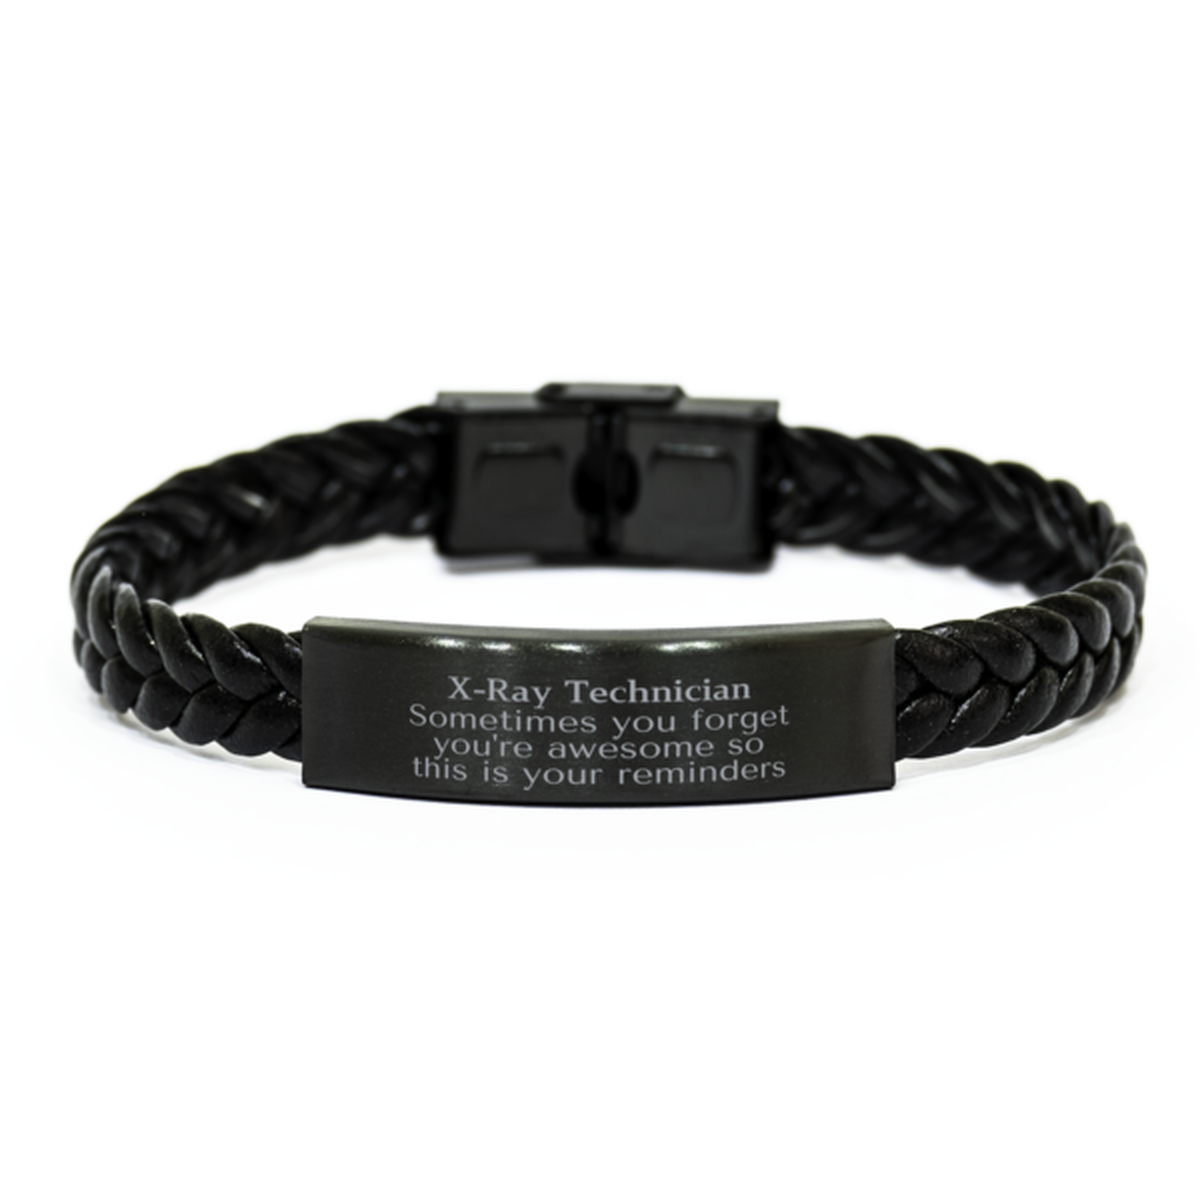 Sentimental X-Ray Technician Braided Leather Bracelet, X-Ray Technician Sometimes you forget you're awesome so this is your reminders, Graduation Christmas Birthday Gifts for X-Ray Technician, Men, Women, Coworkers